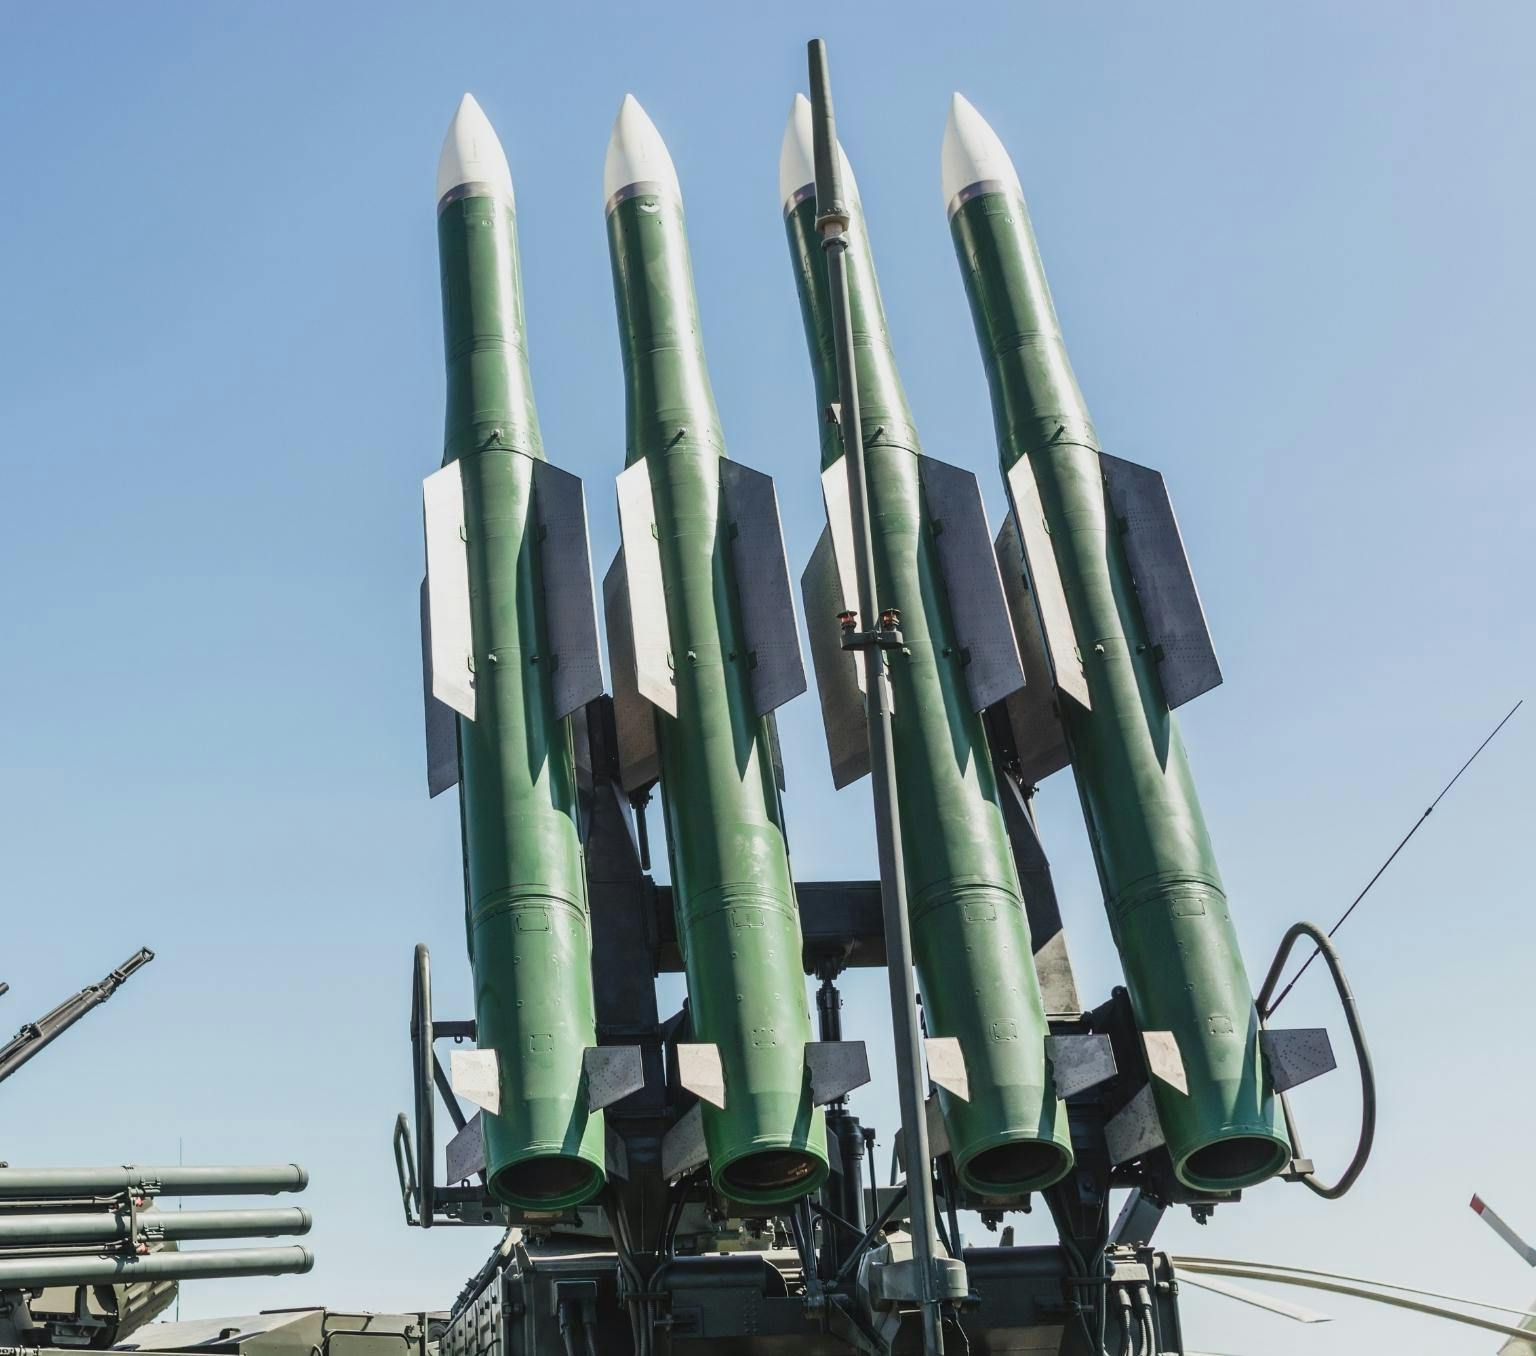 Four large green missiles attached to a launcher point up at a blue sky.